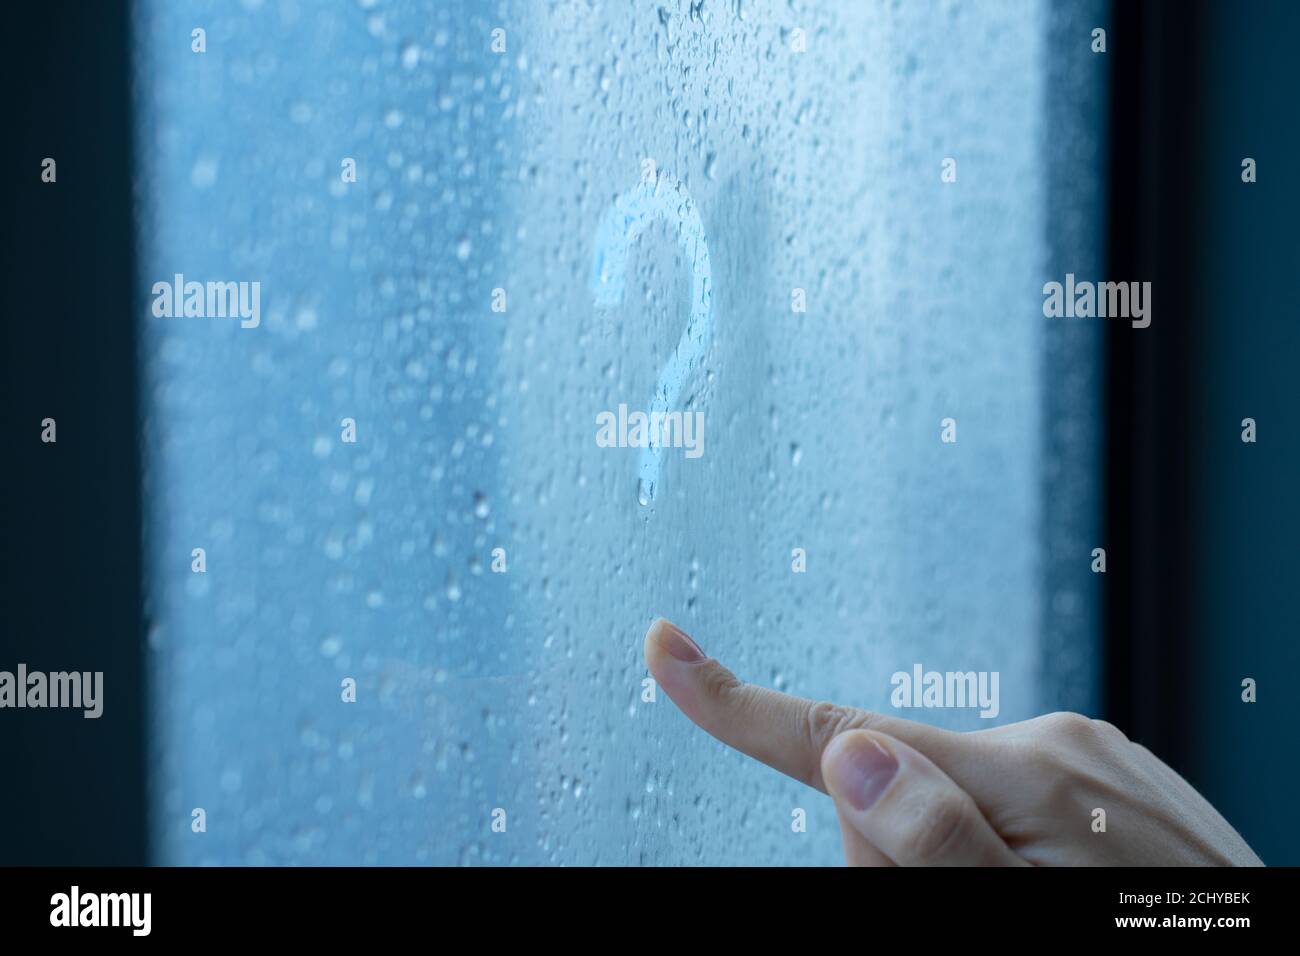 Female hand draws a question mark on a foggy window during the rain. A glass in drops of water Stock Photo